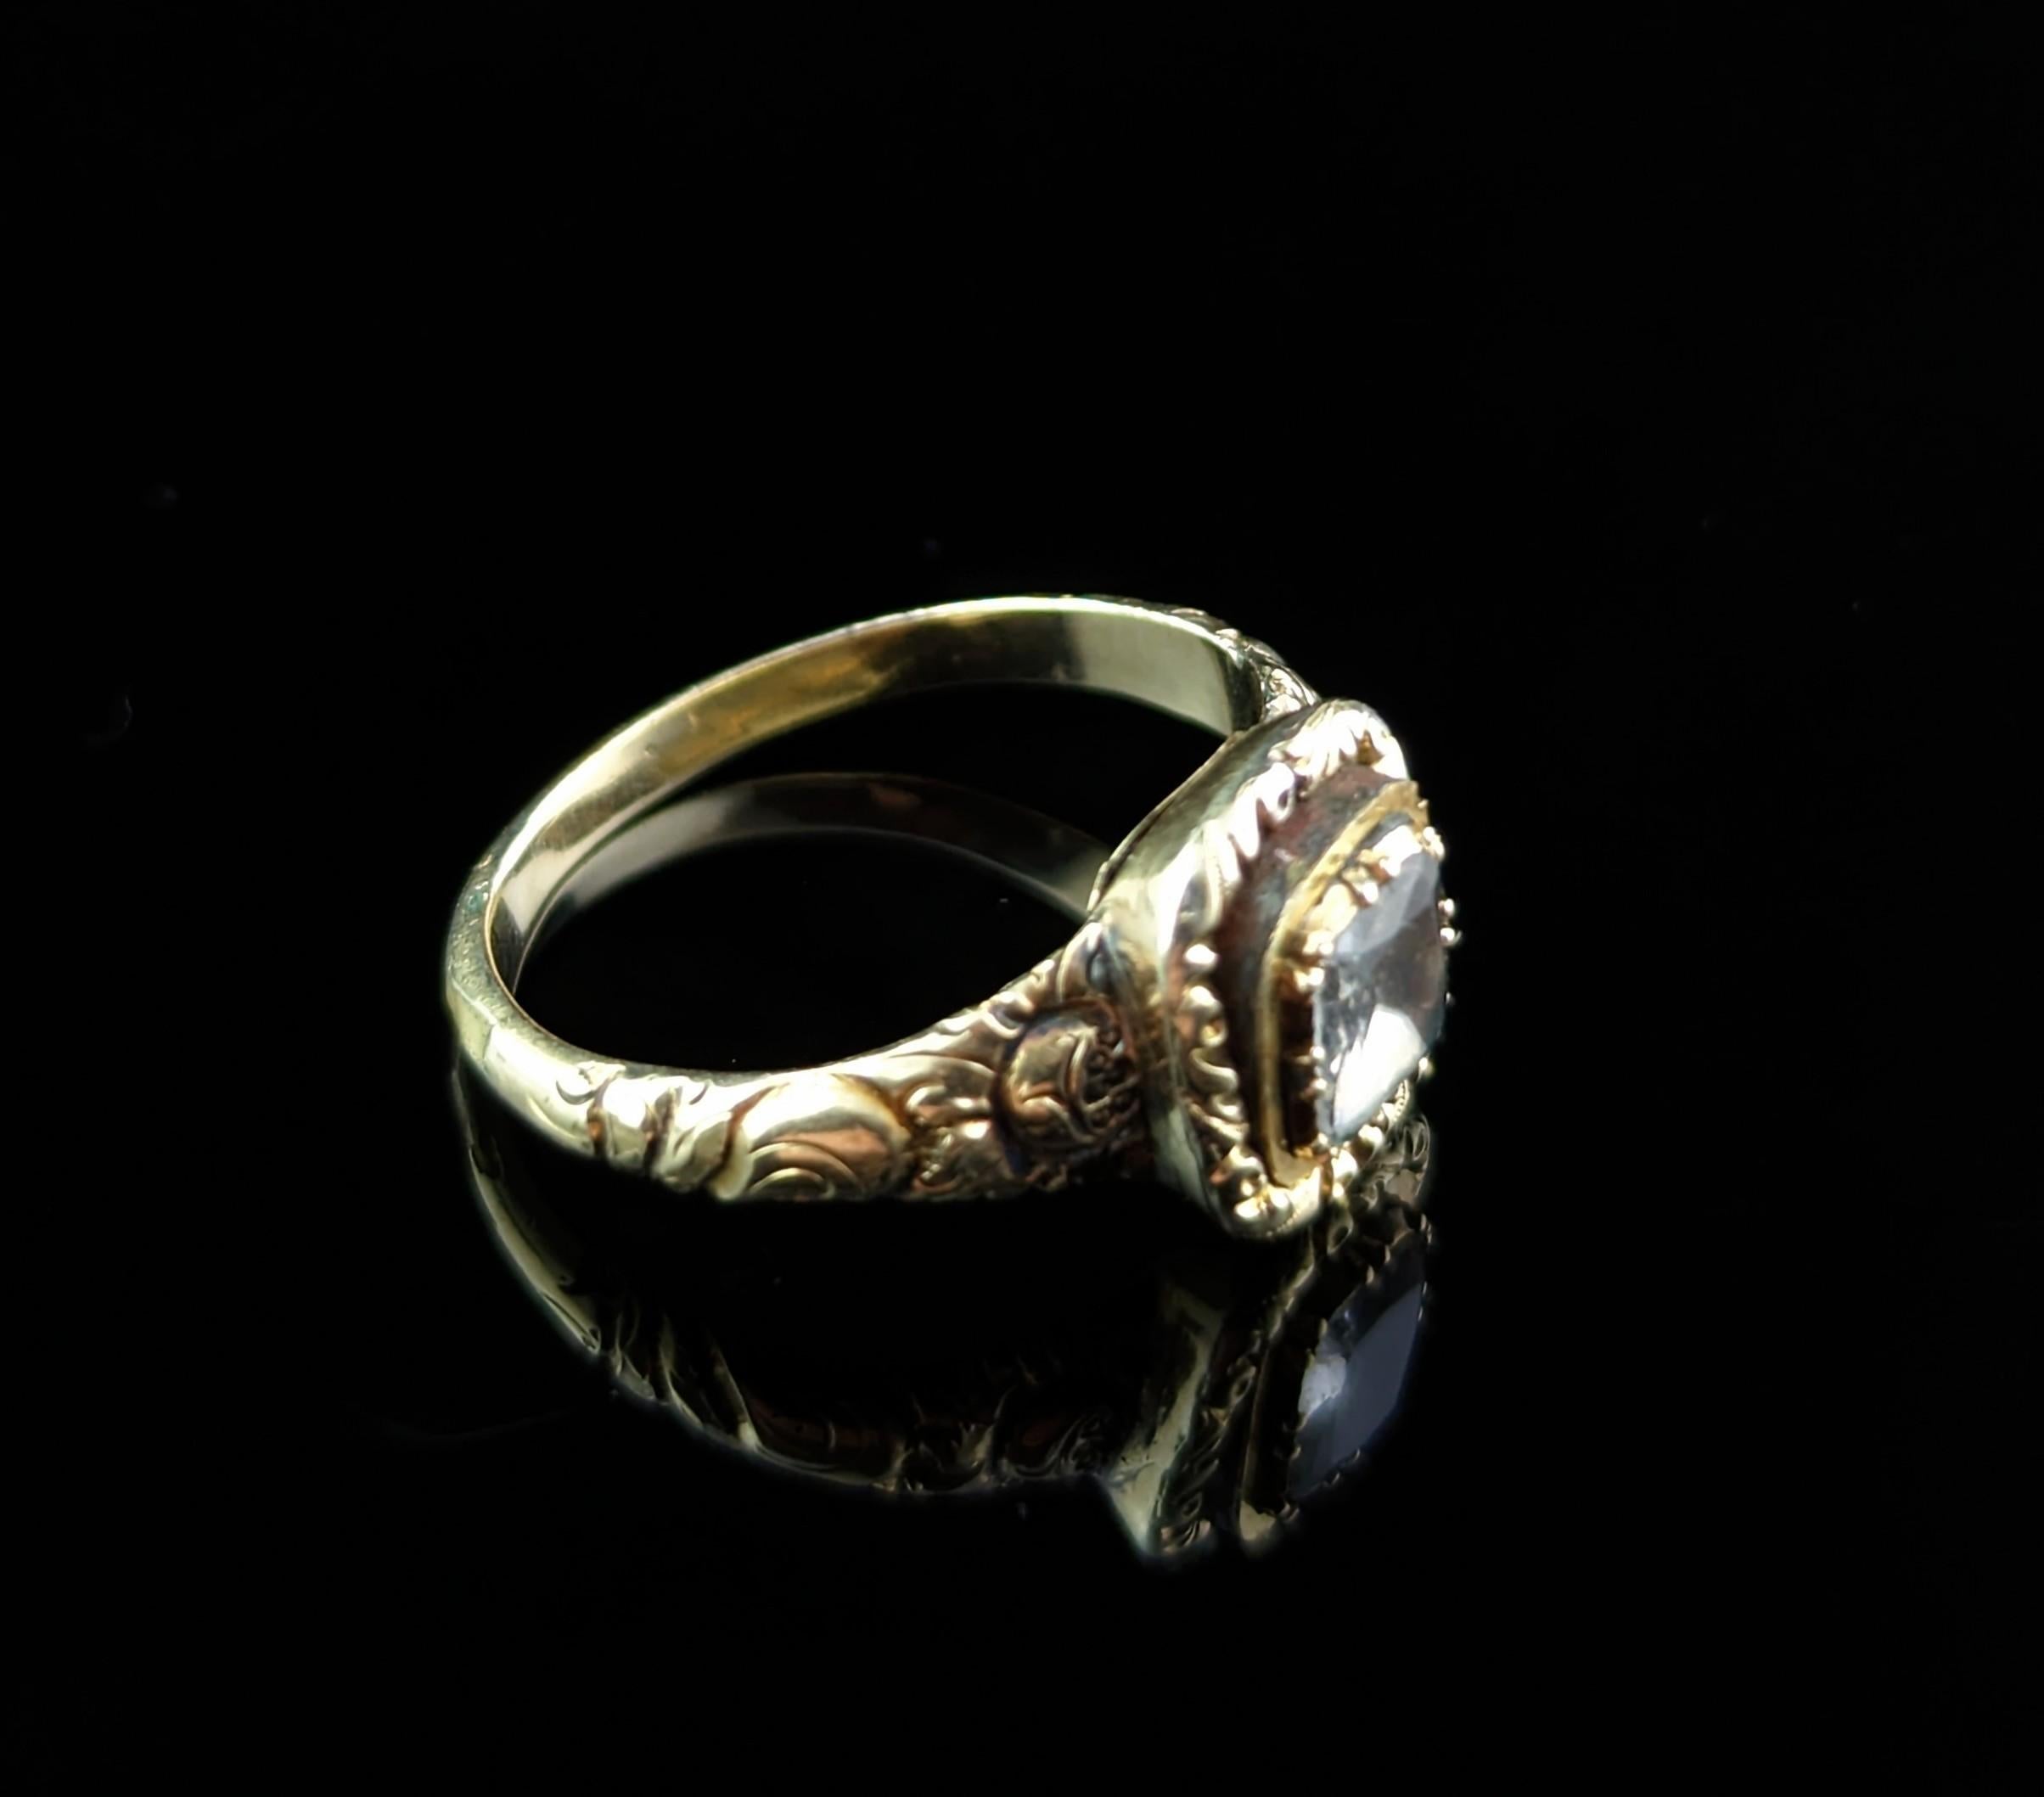 Antique Georgian Foiled Quartz Ring, 12k Gold, Chase and Engraved 5